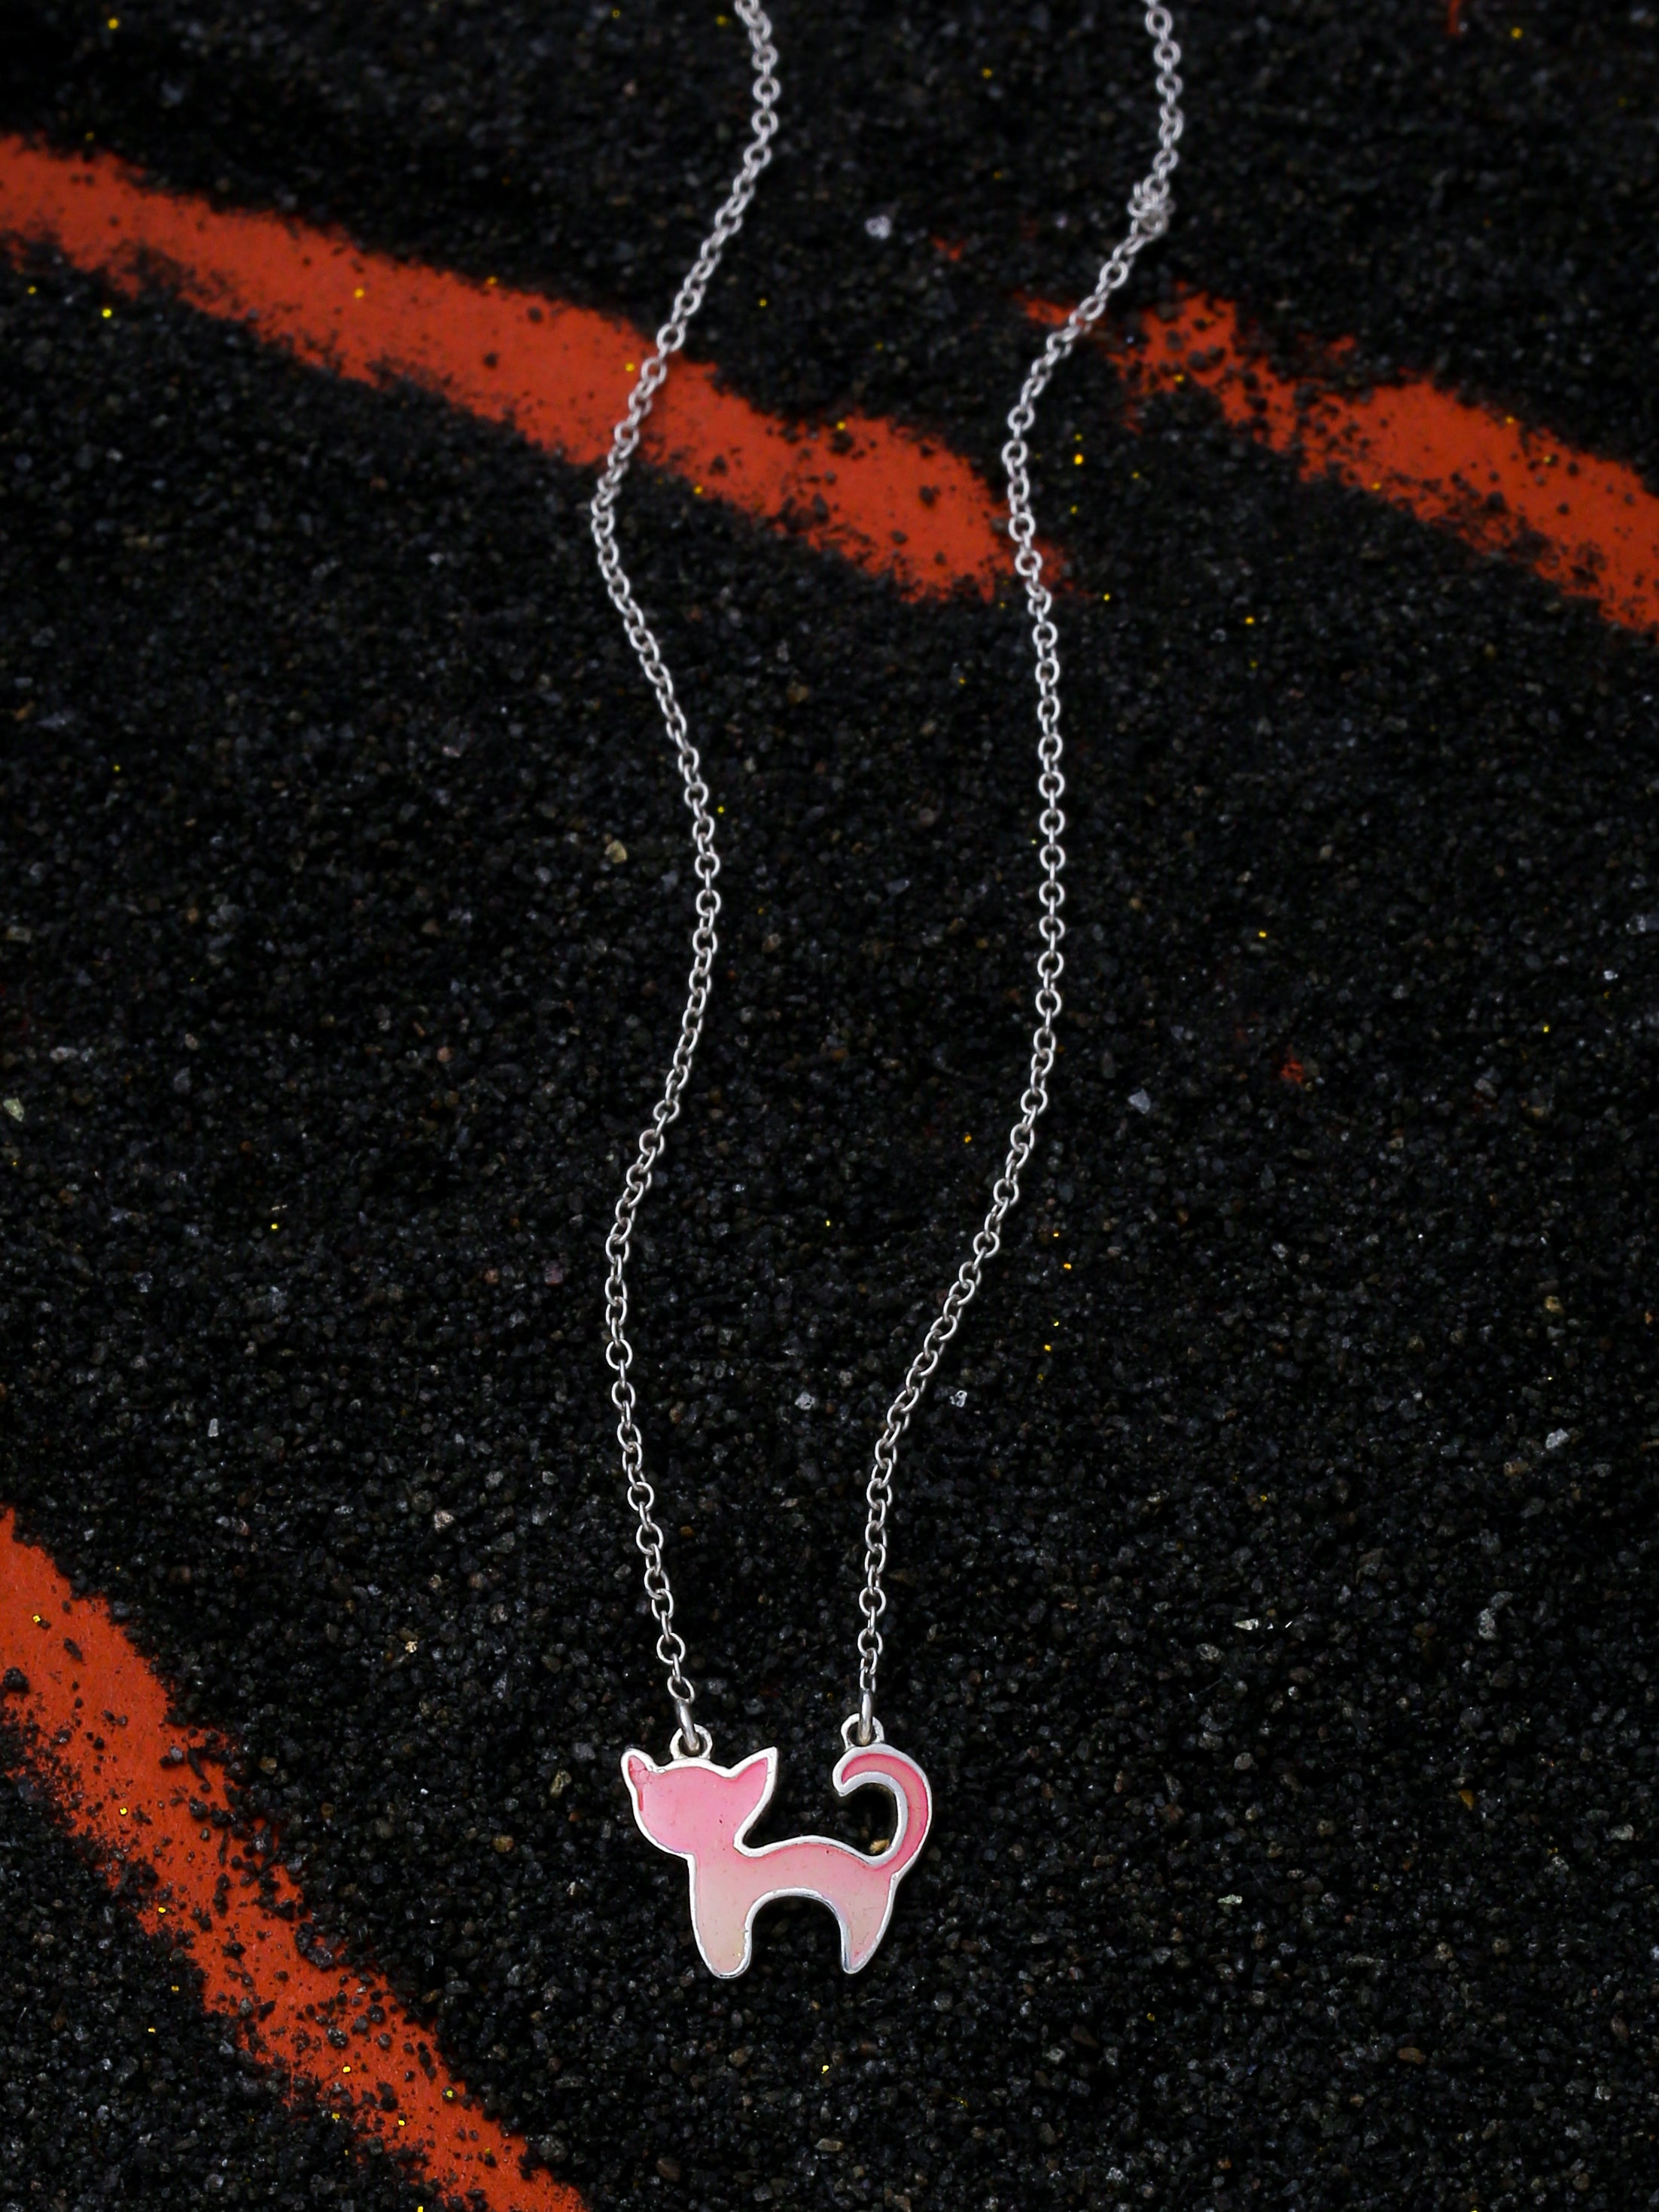 The Enamel Kitty Bliss: Whimsical Pendant and Chain Set